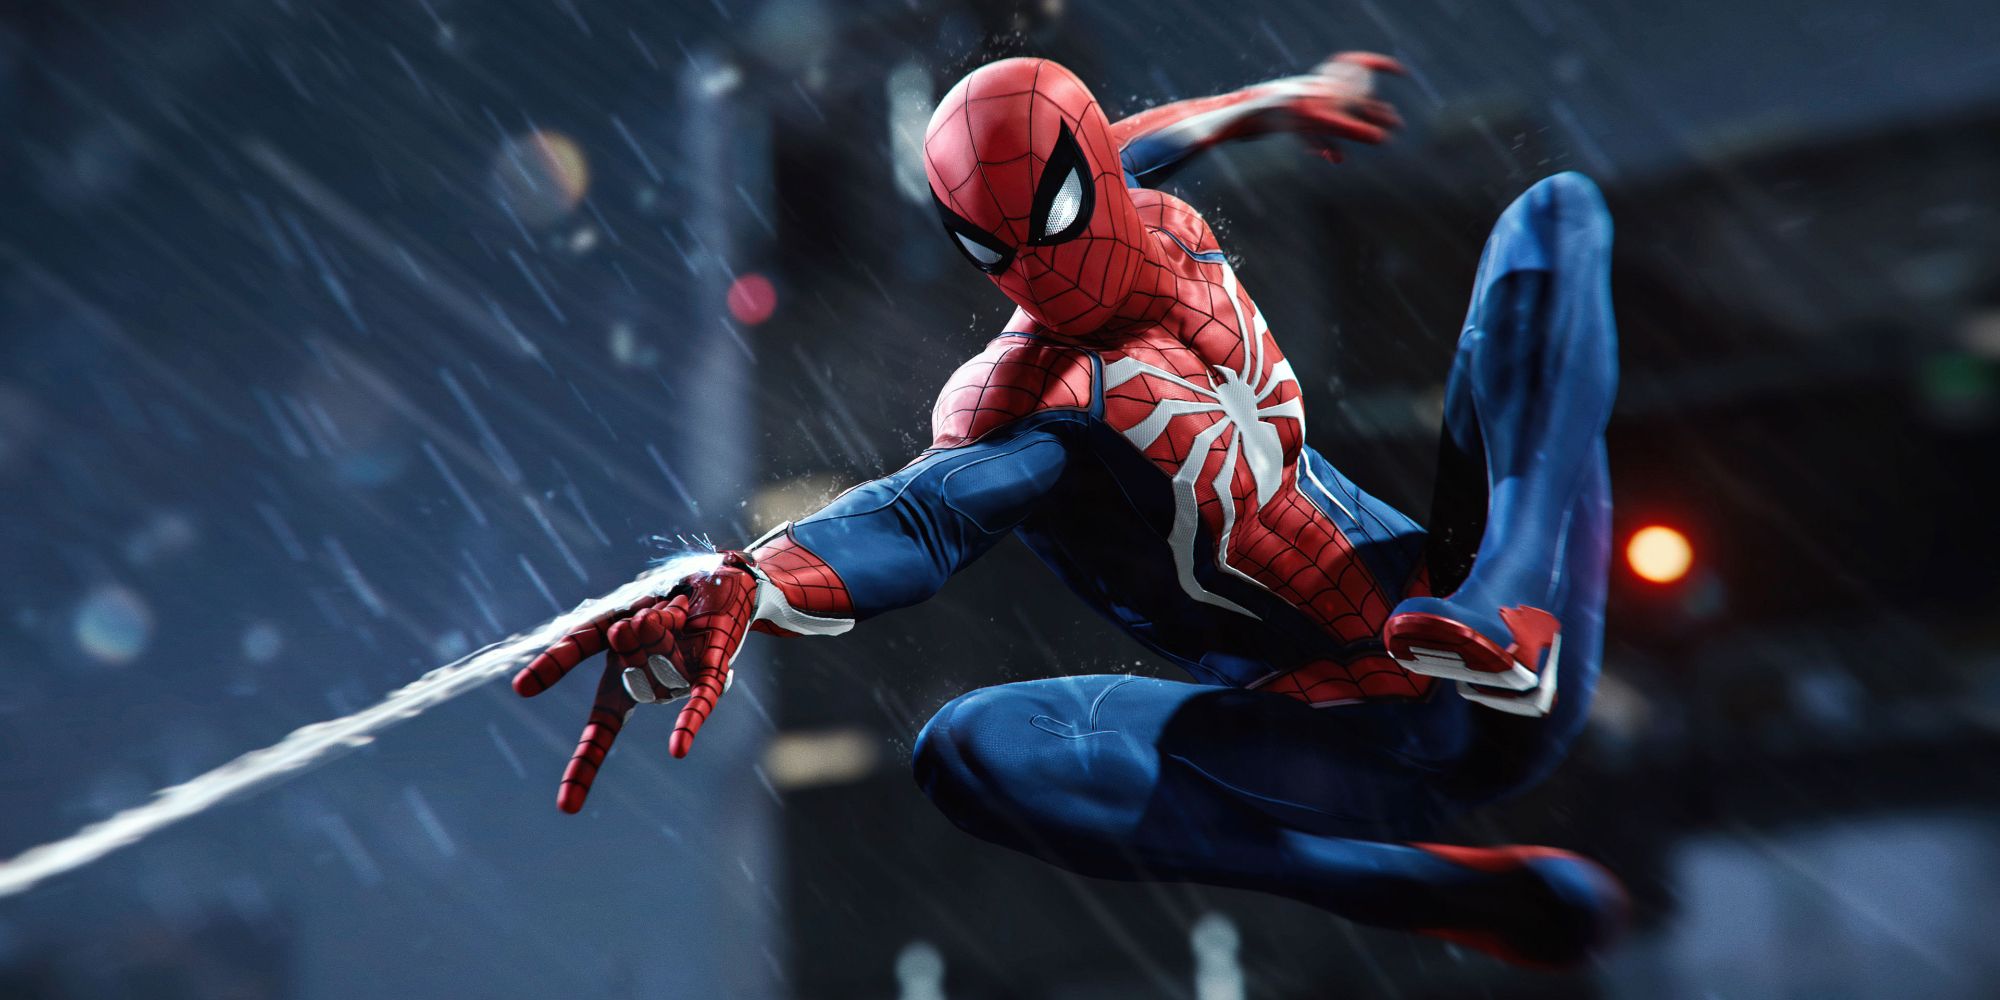 Marvel's Spider-Man is an indulgence, as long as its more troubling aspects can be ignored.